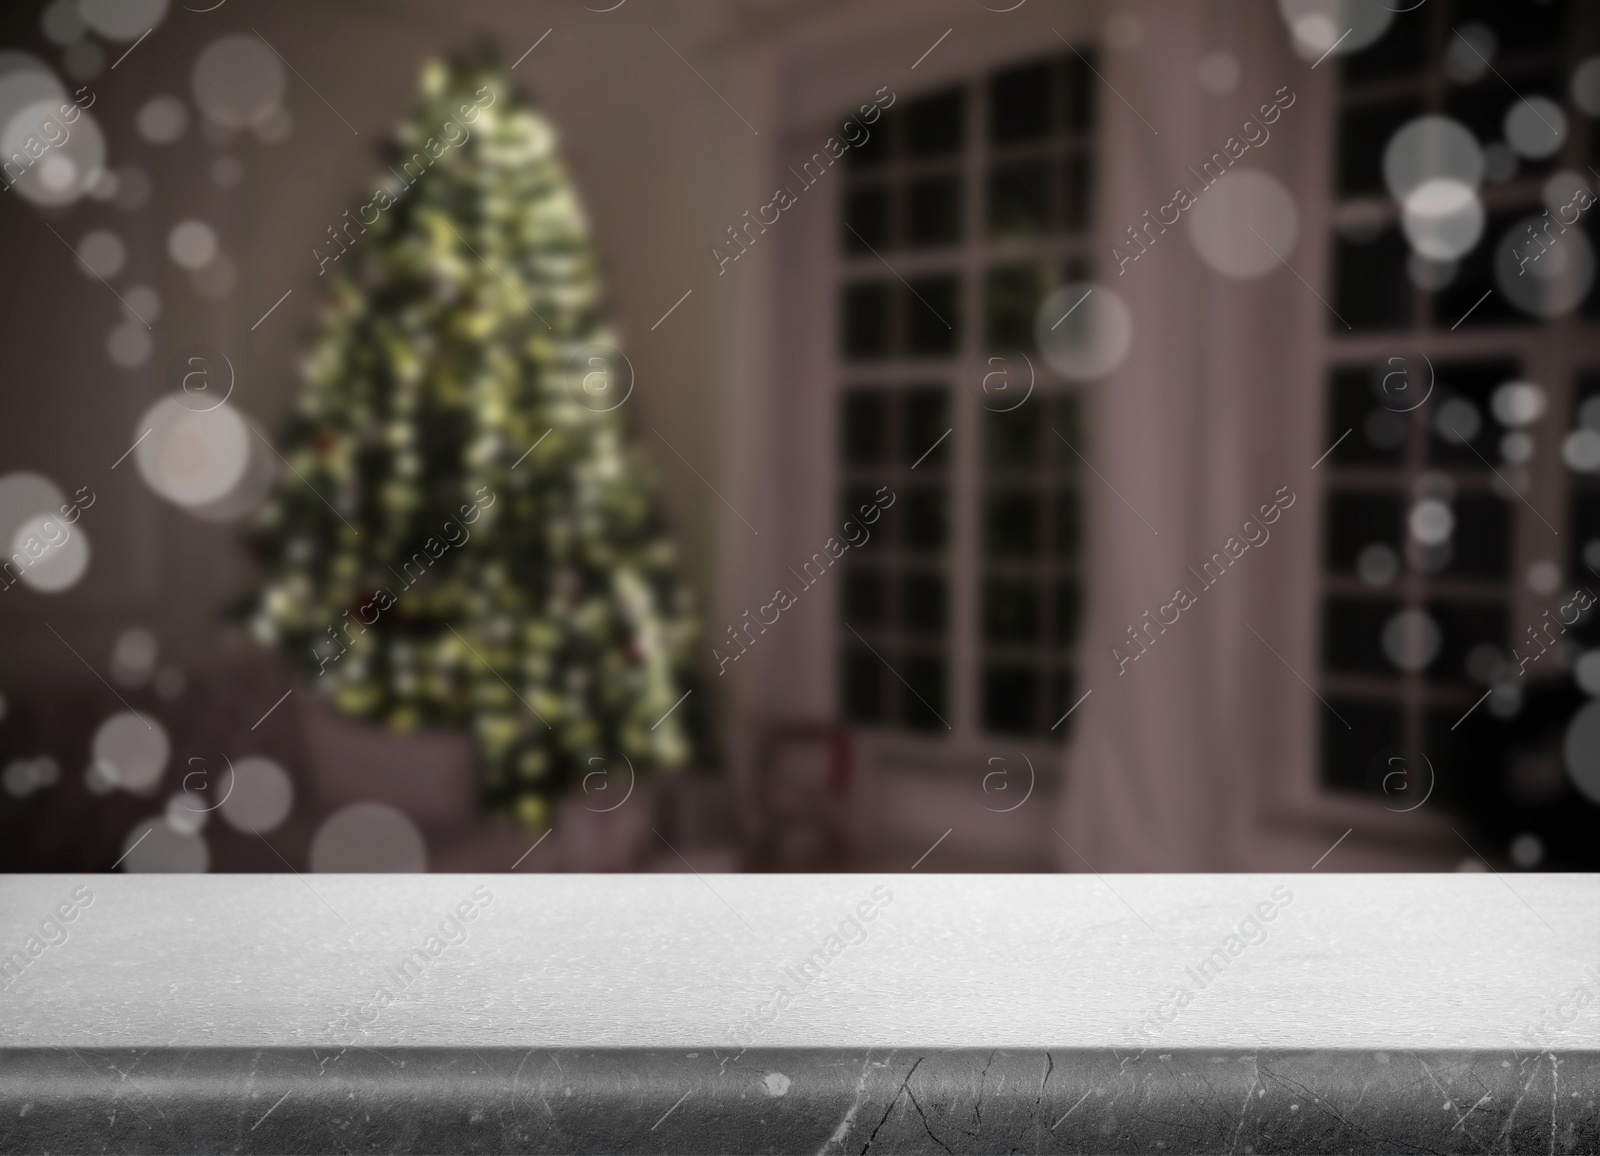 Image of Empty stone surface and blurred view of room decorated for Christmas